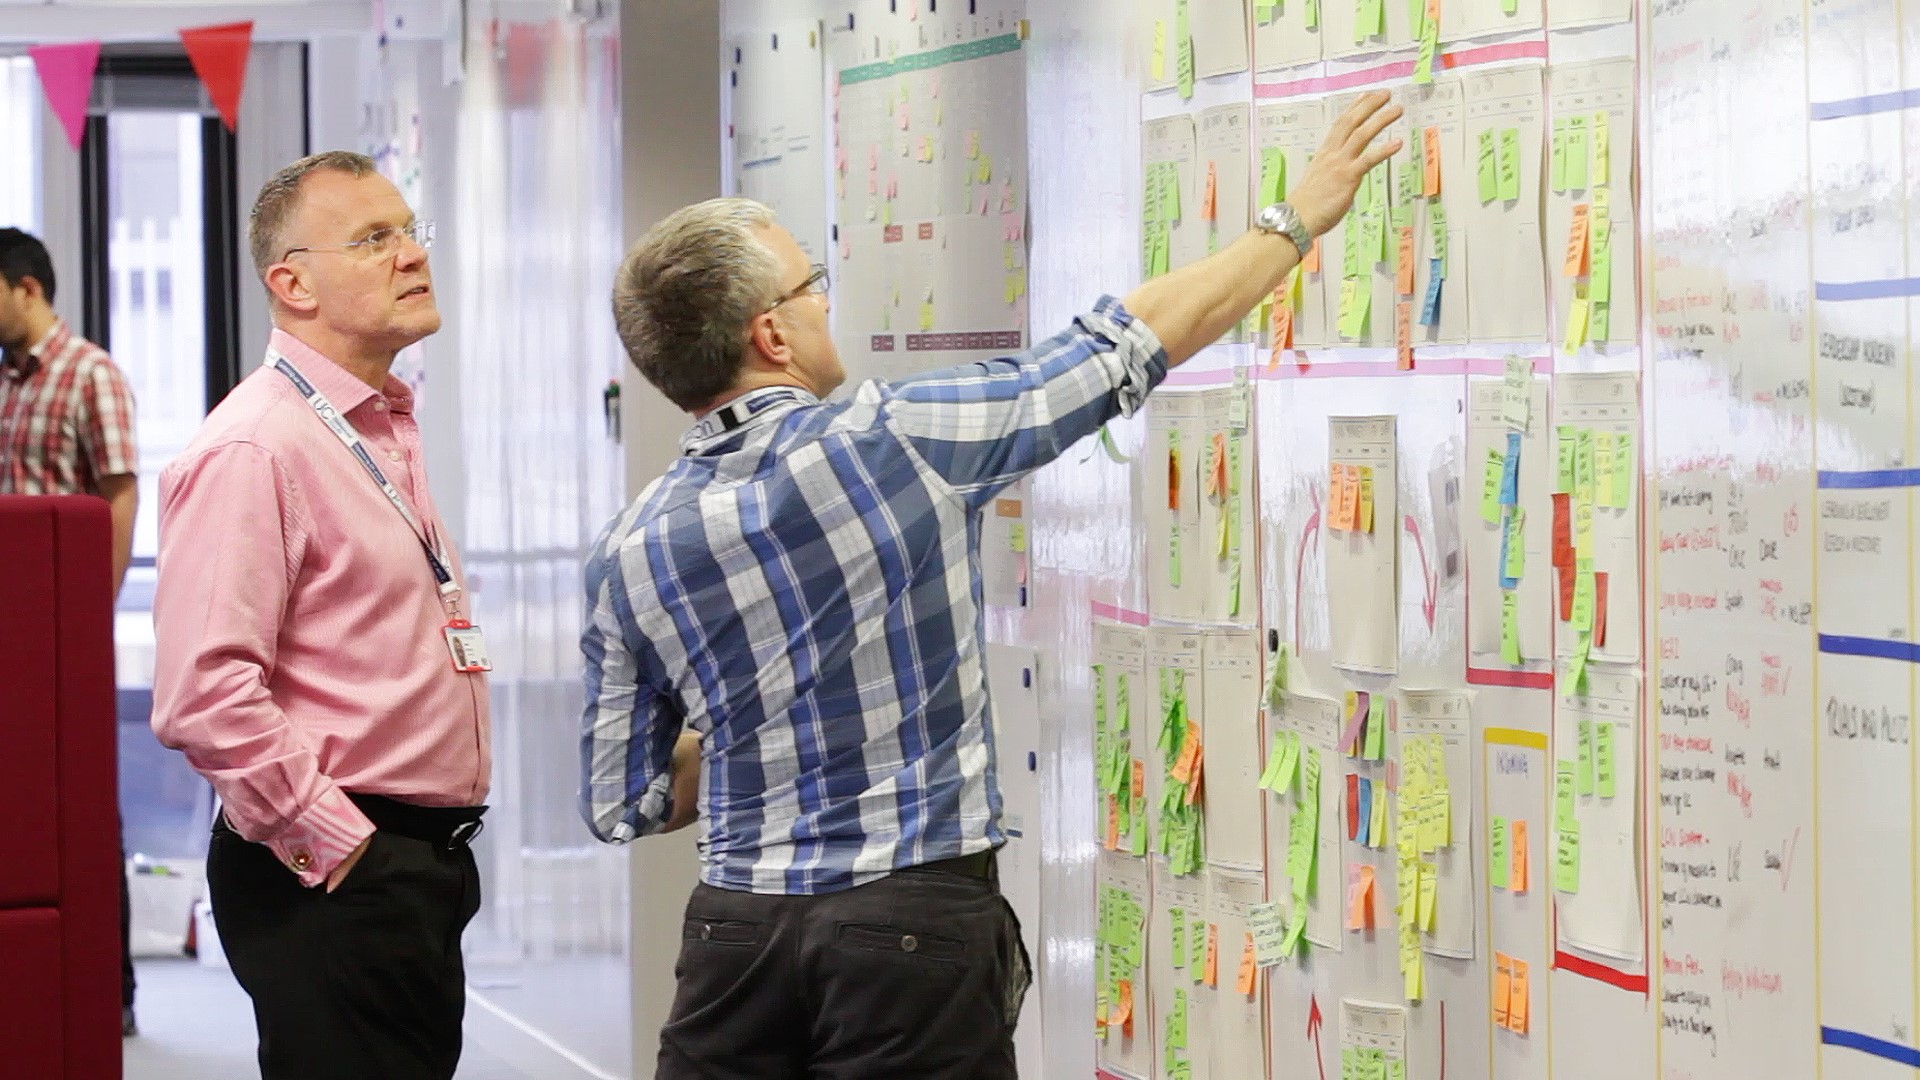 Image of two men looking at post-its on a whiteboard